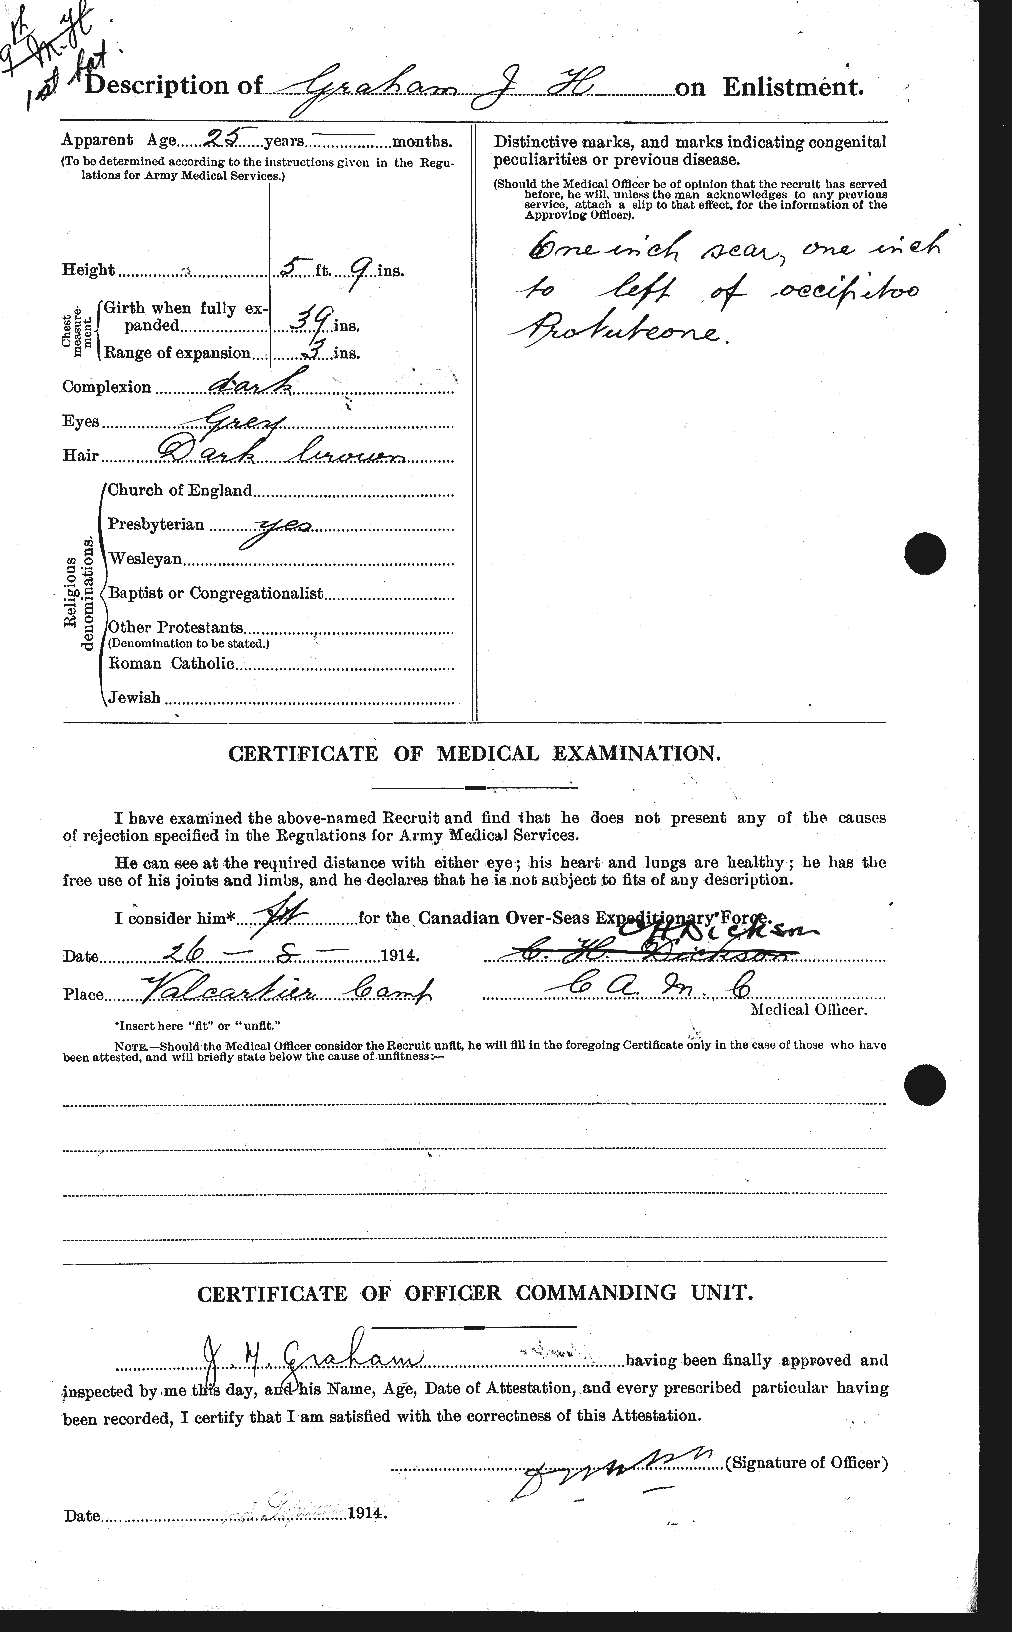 Personnel Records of the First World War - CEF 357824b